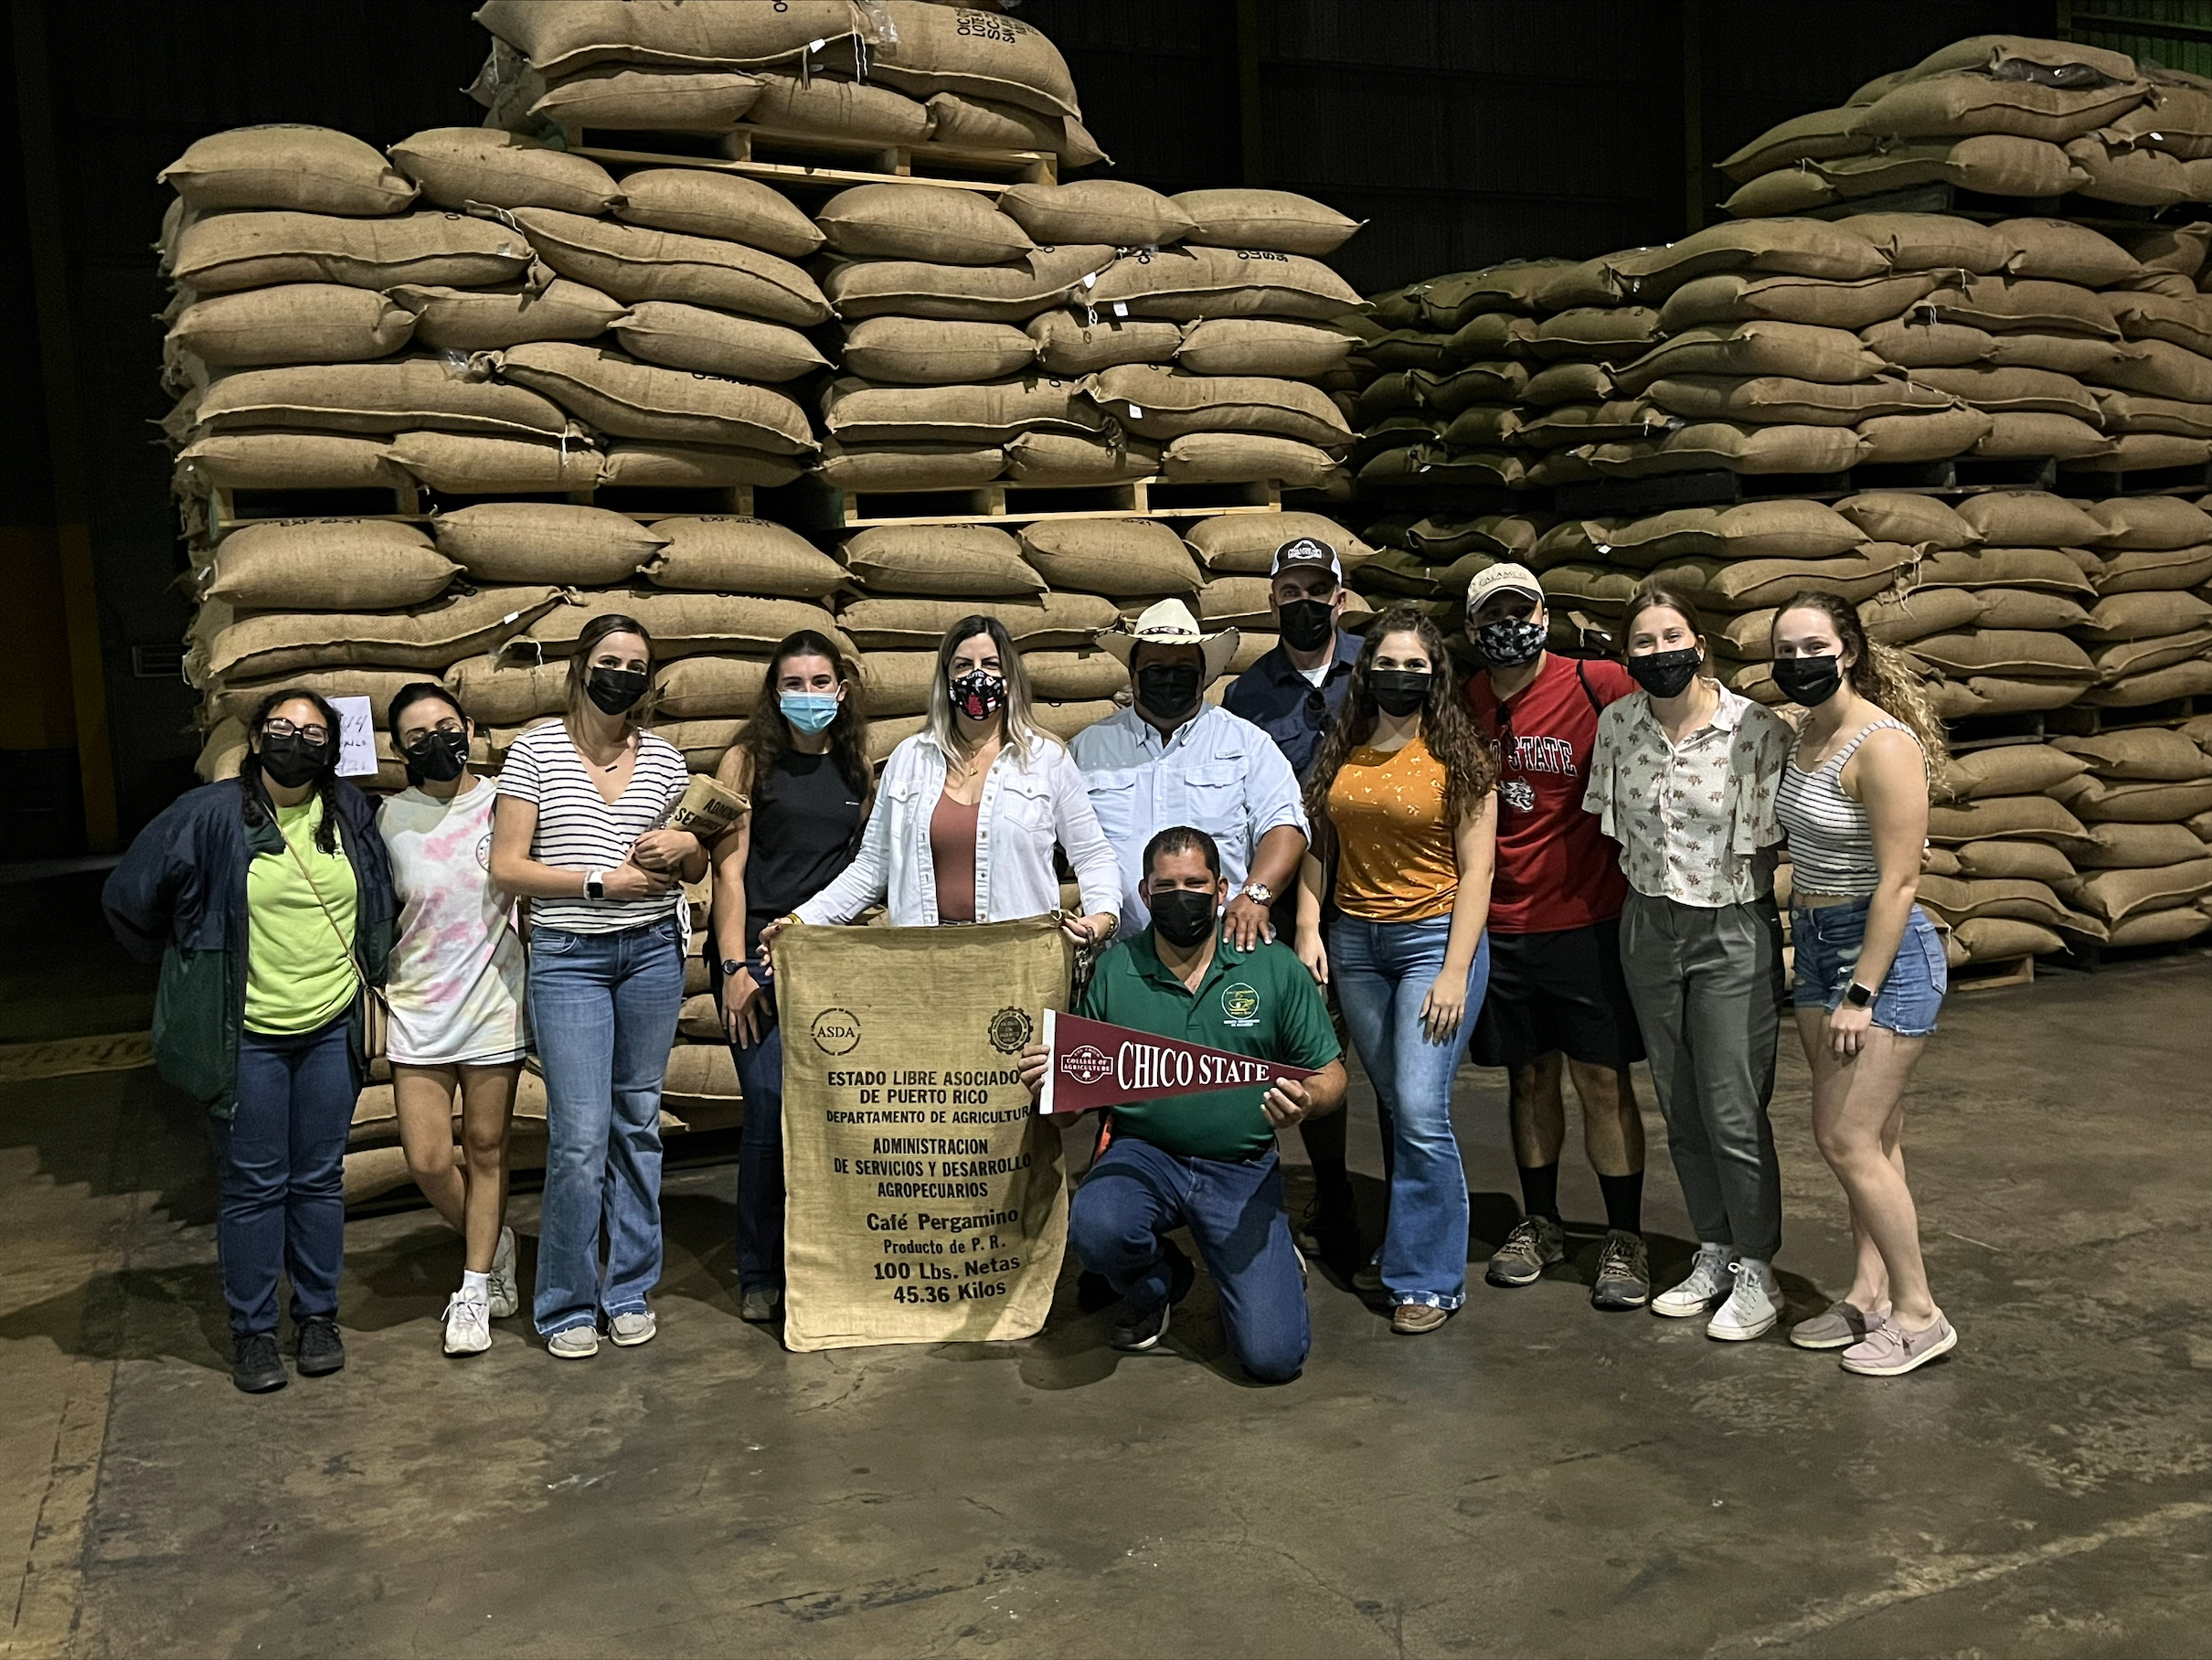 College students and faculty stand in a coffee processing plant, with dozens of bags of coffee beans stacked up in the background.